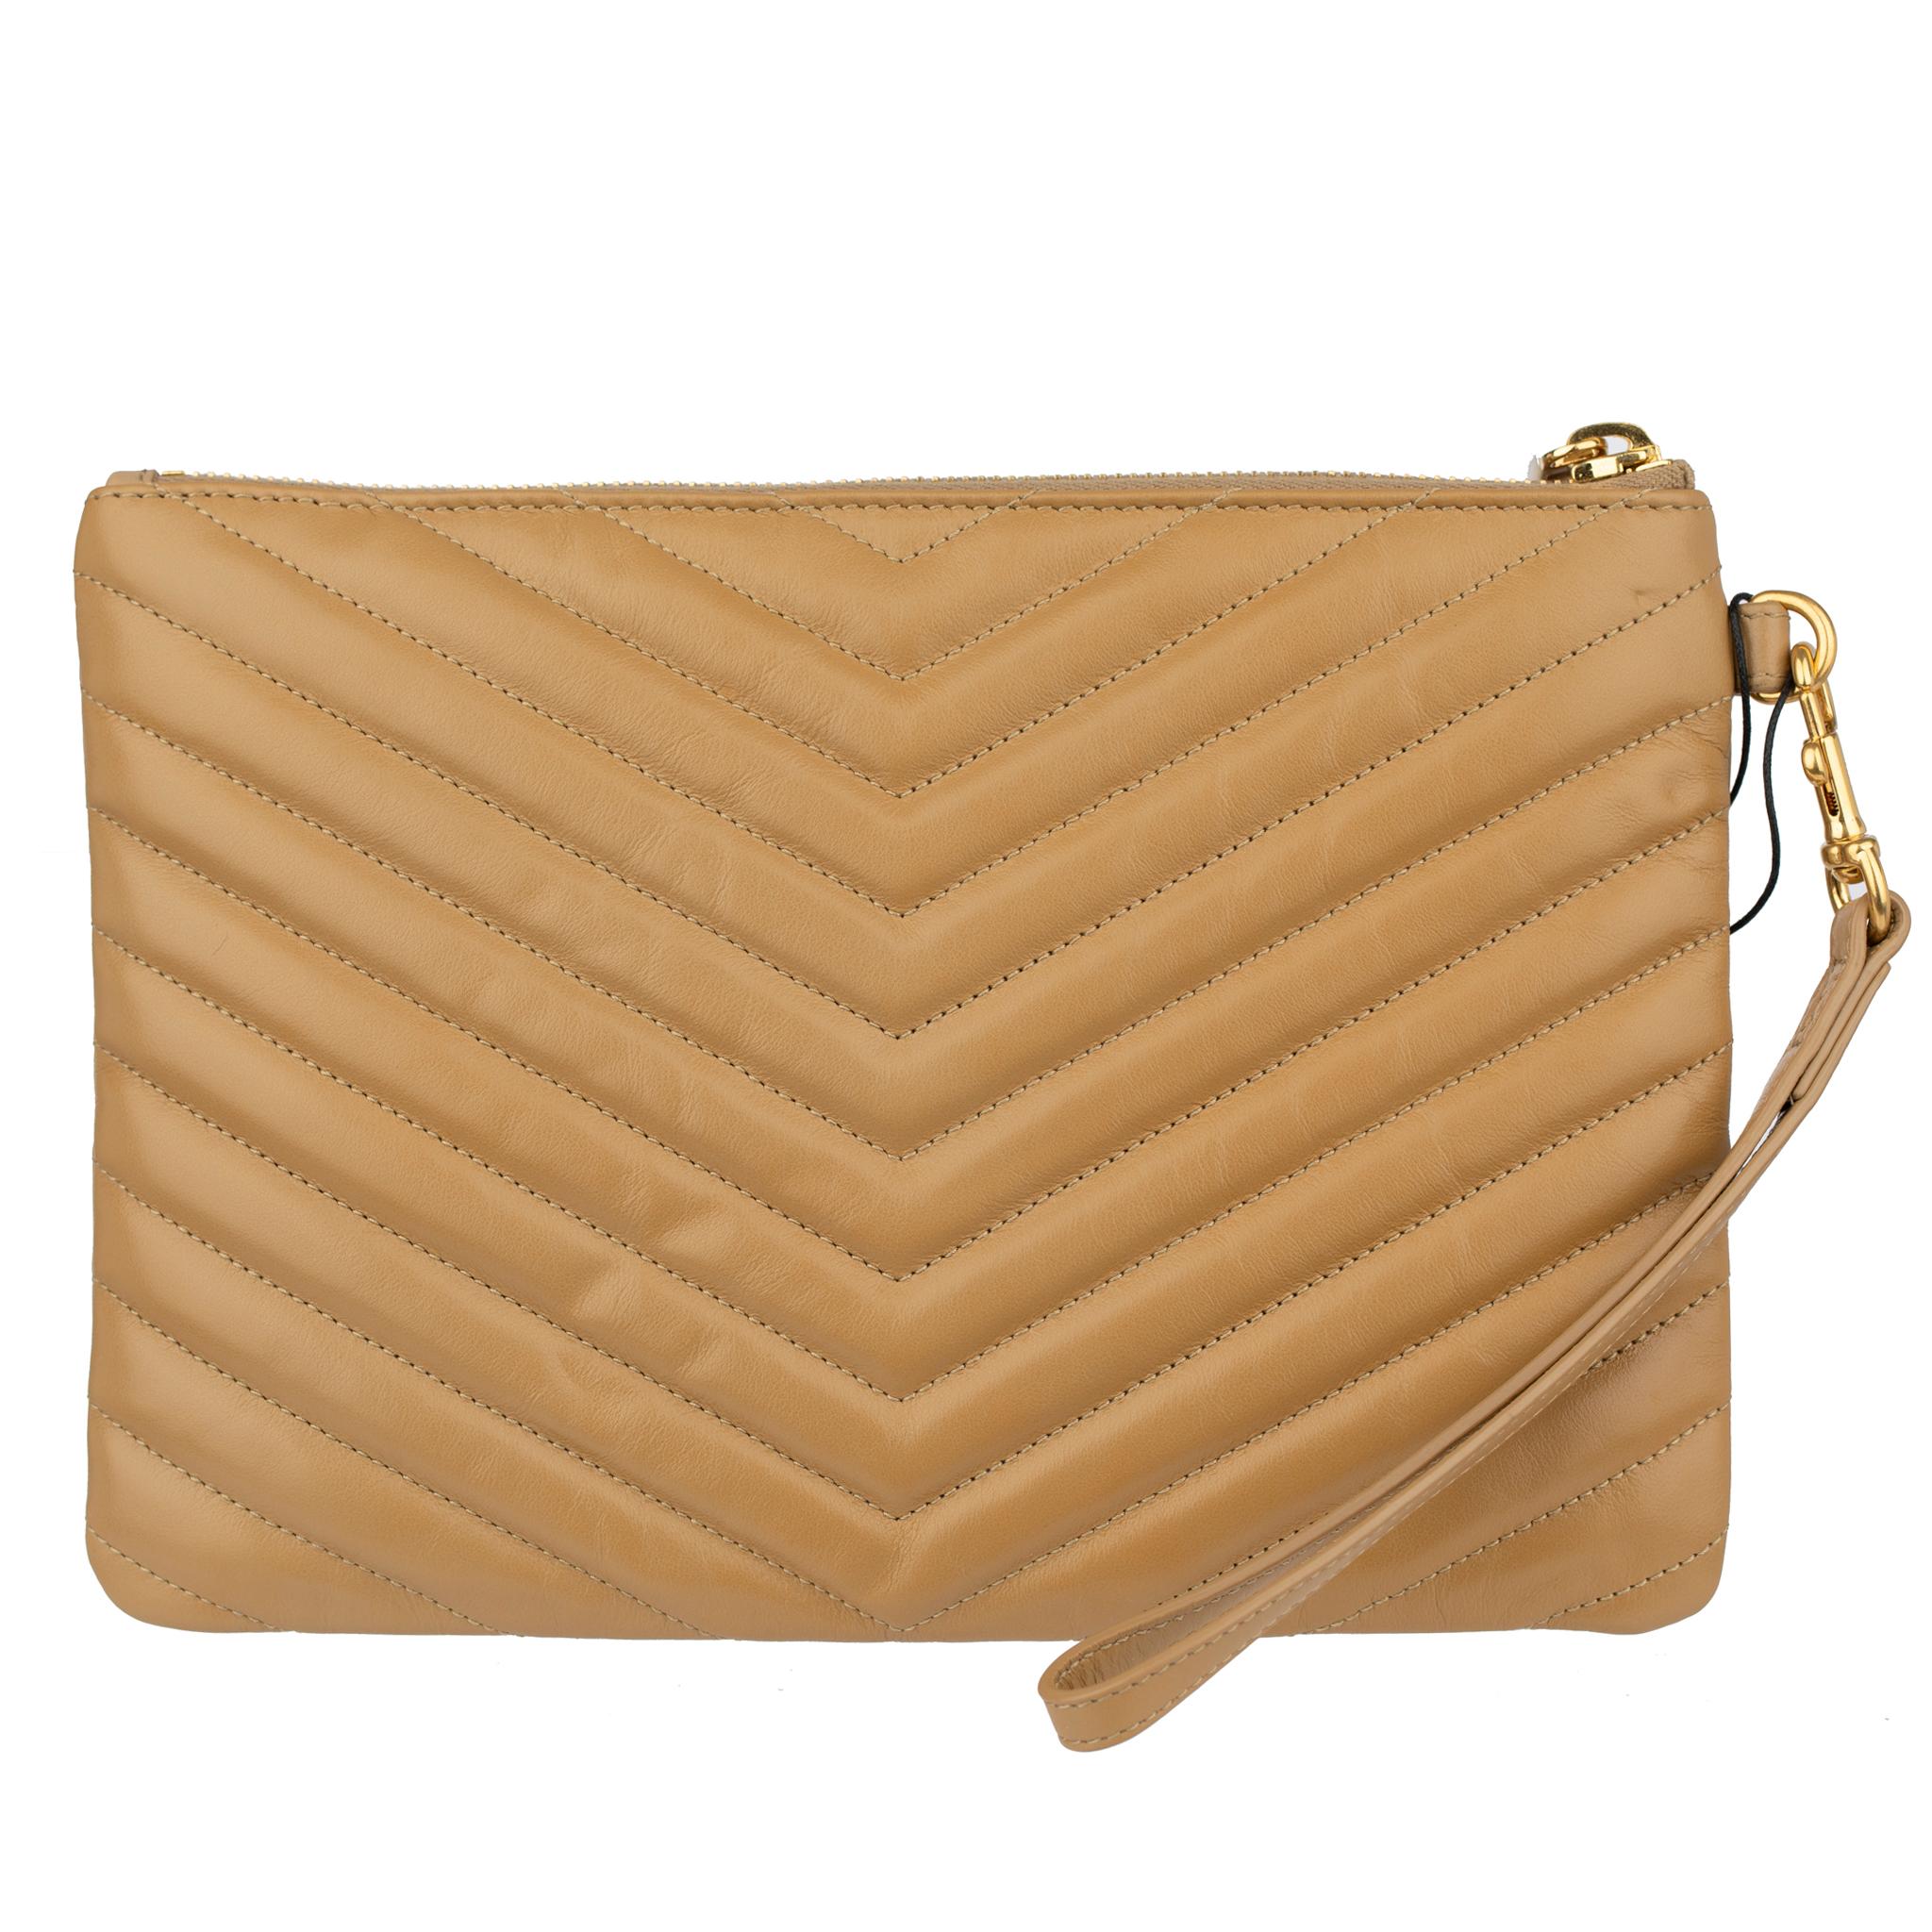 Yves Saint Laurent Beige Leather Quilted Pouch 1